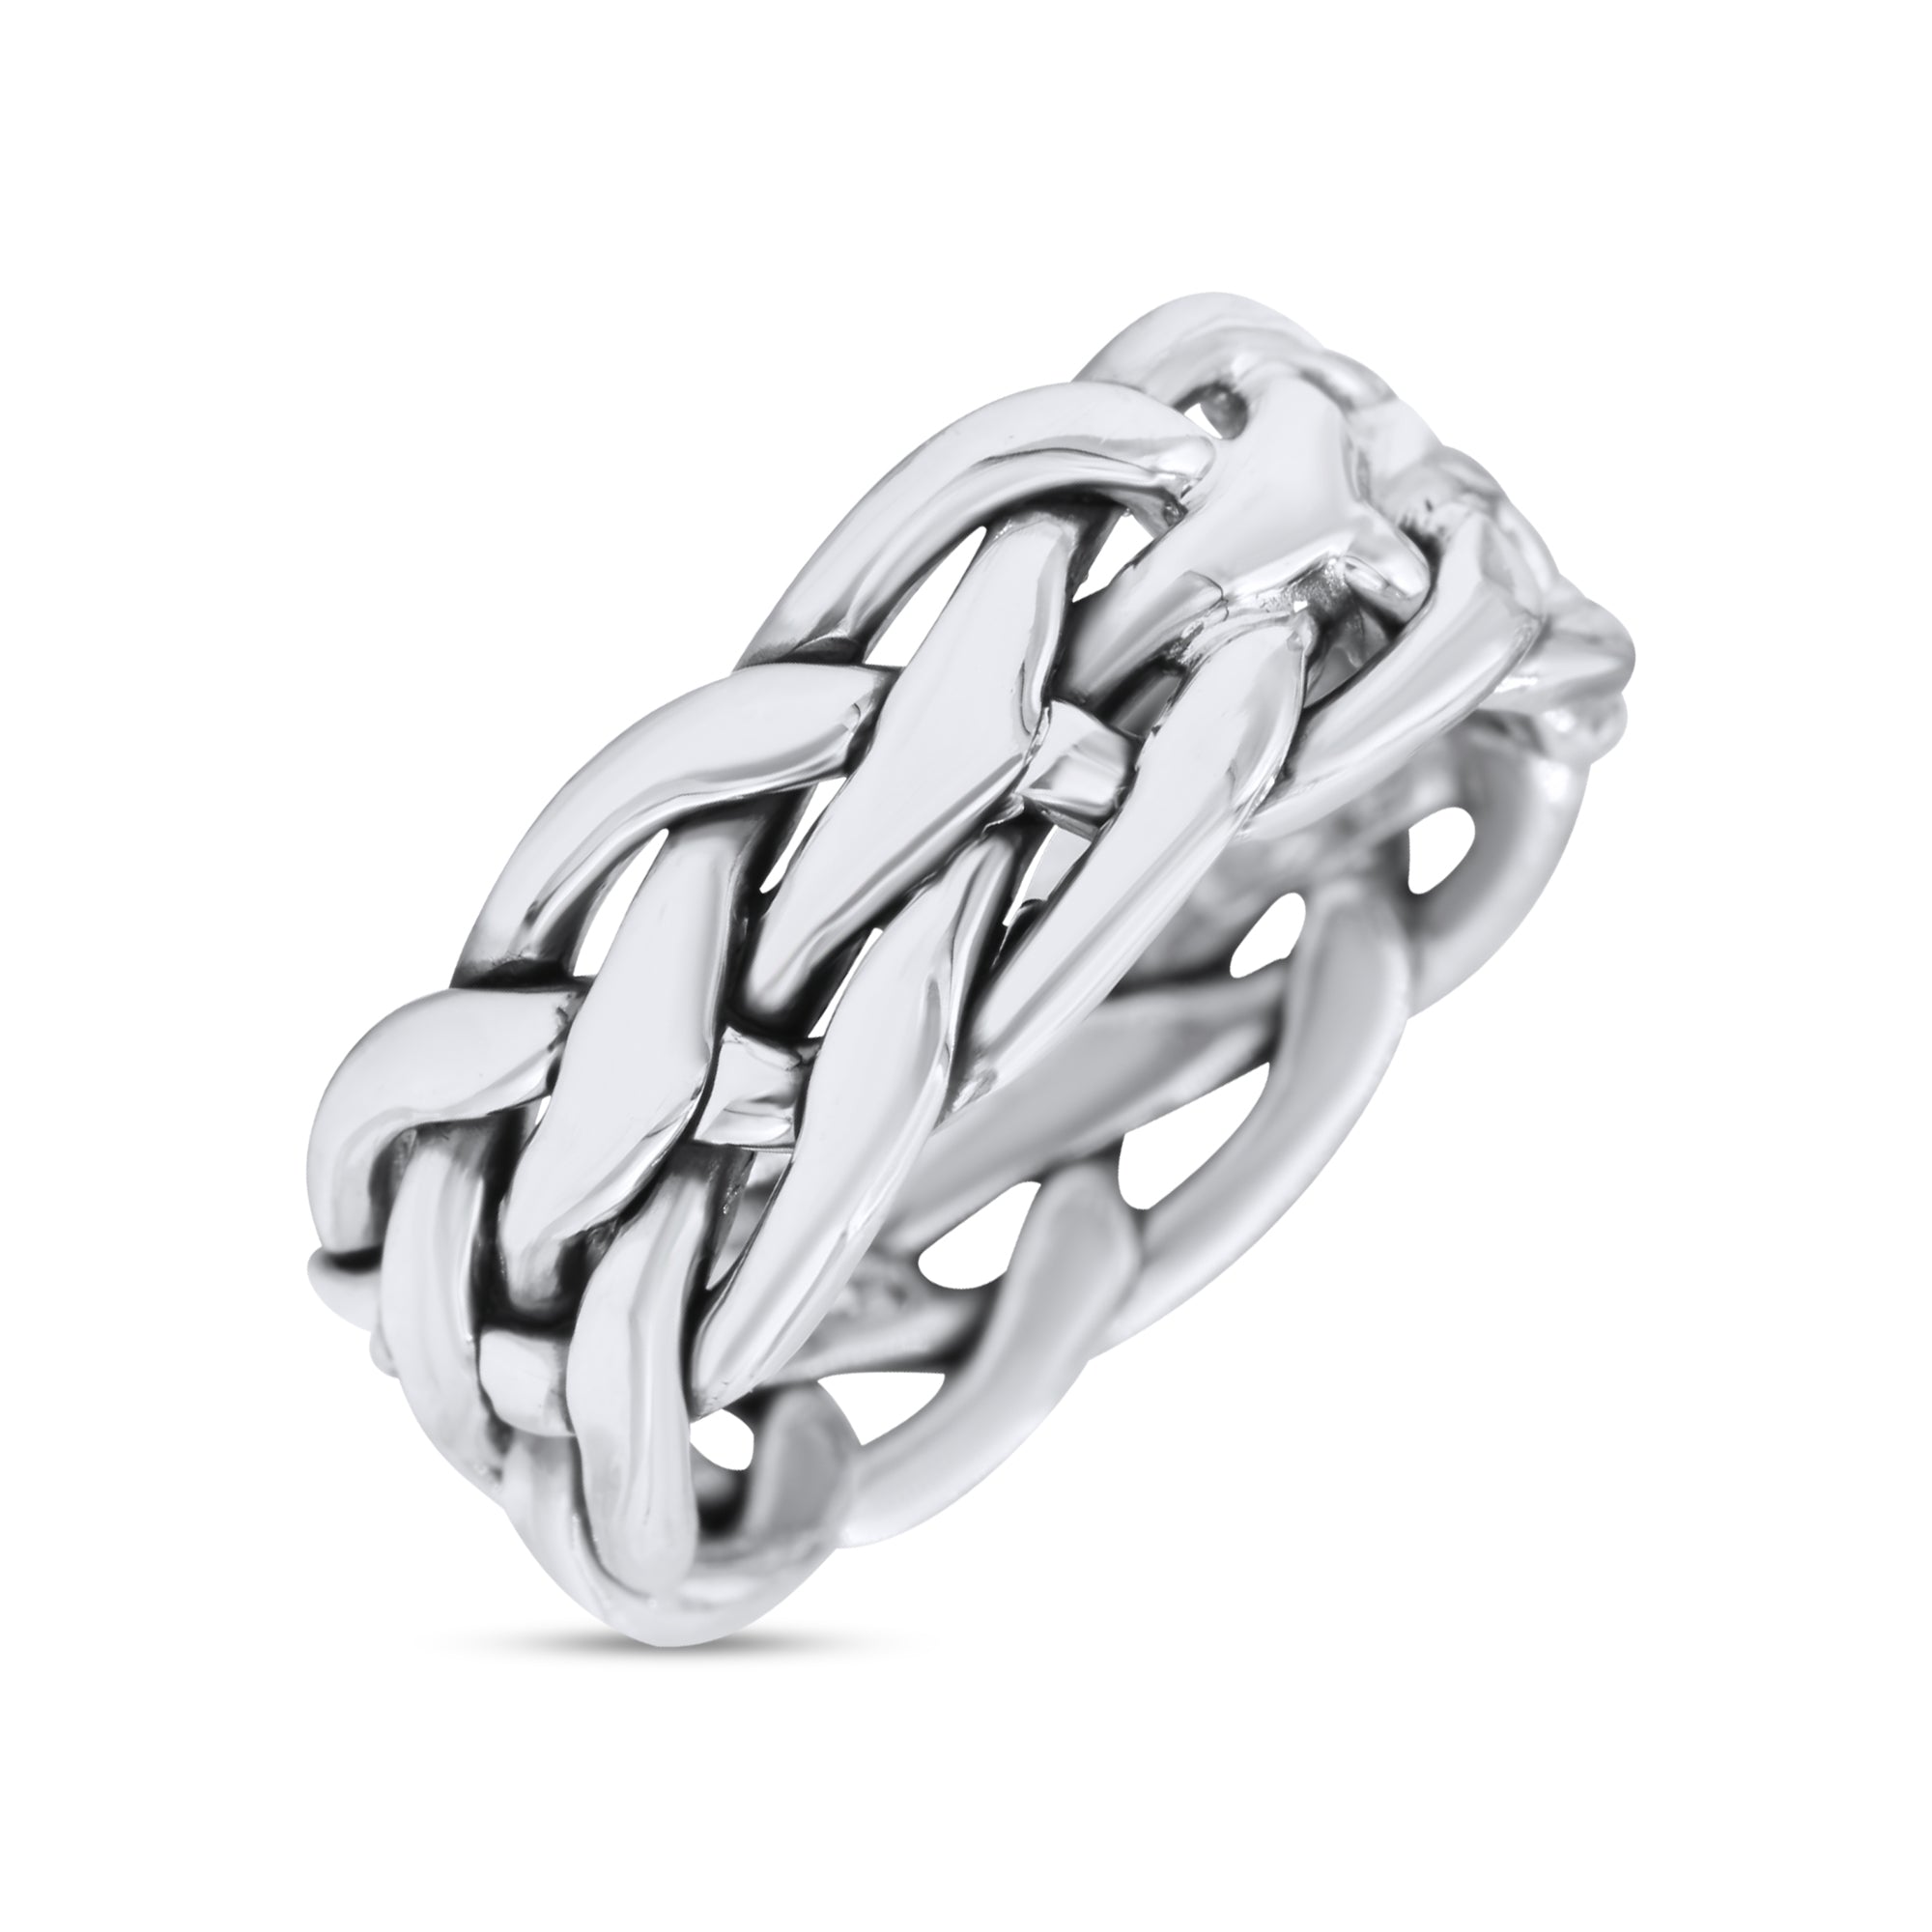 MEENAZ silver rings for men boy boyfriend love single stylish party designer  thumb band Metal, Alloy, Steel, Stainless Steel, Silver Titanium, Platinum,  Rhodium, Silver Plated Ring Price in India - Buy MEENAZ